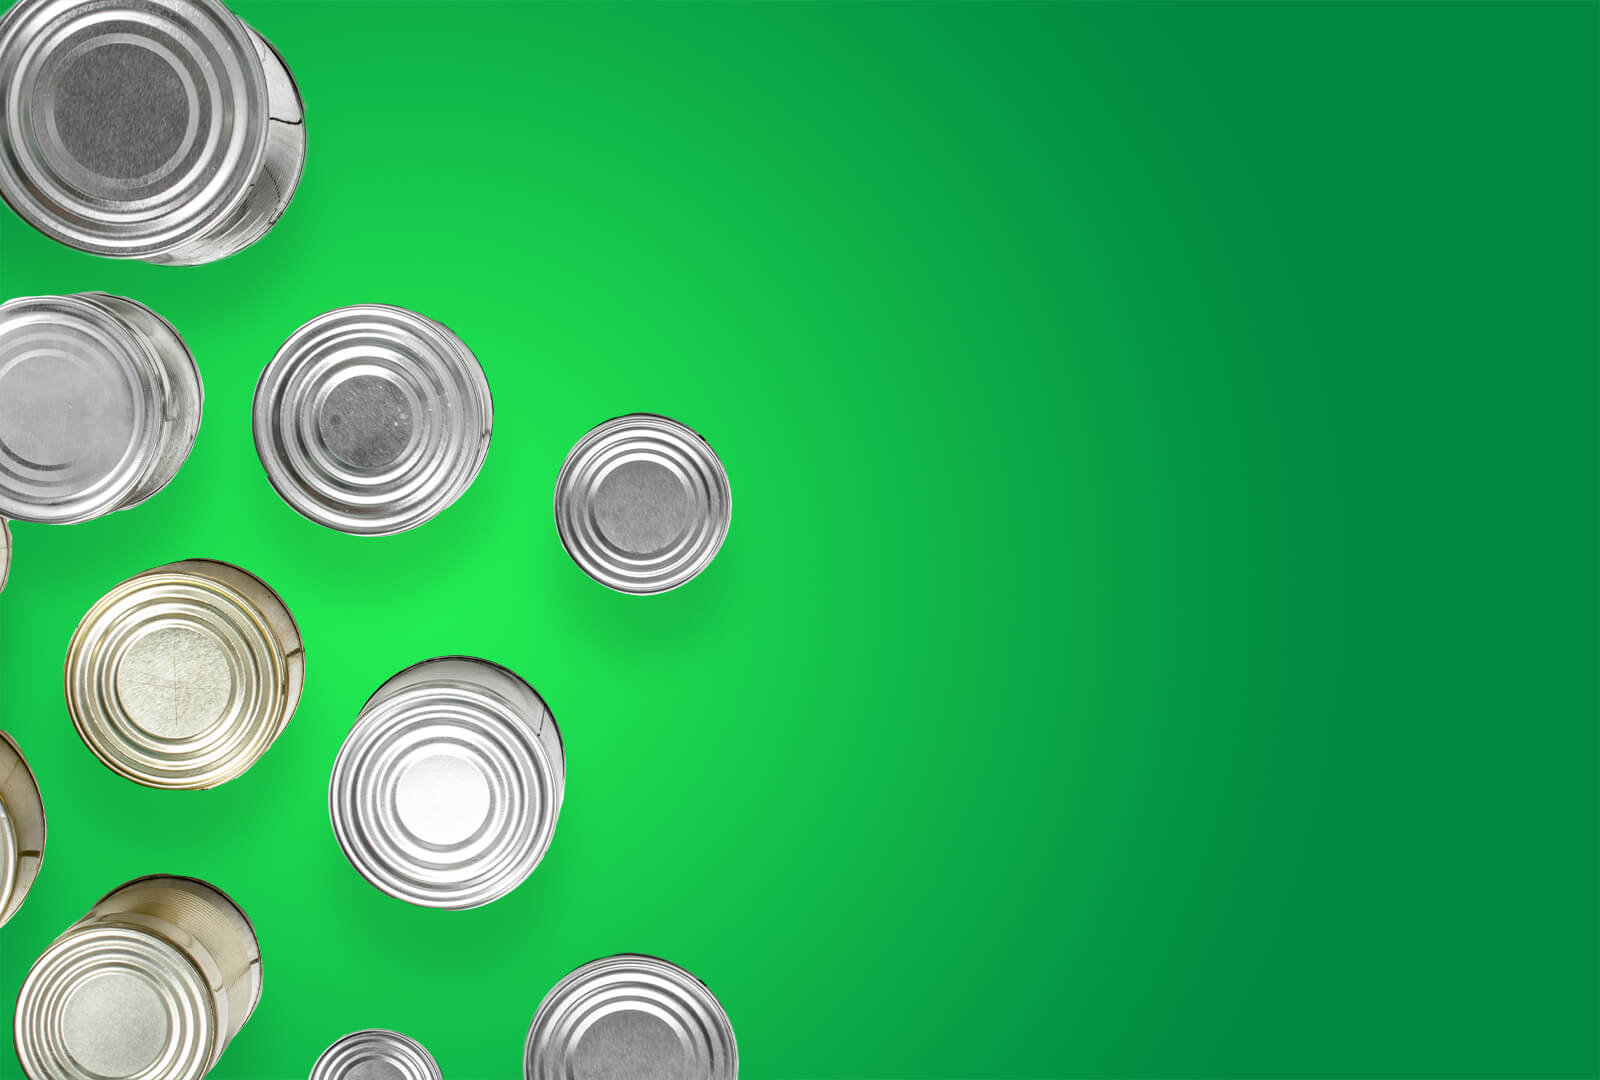 Top view of canned goods